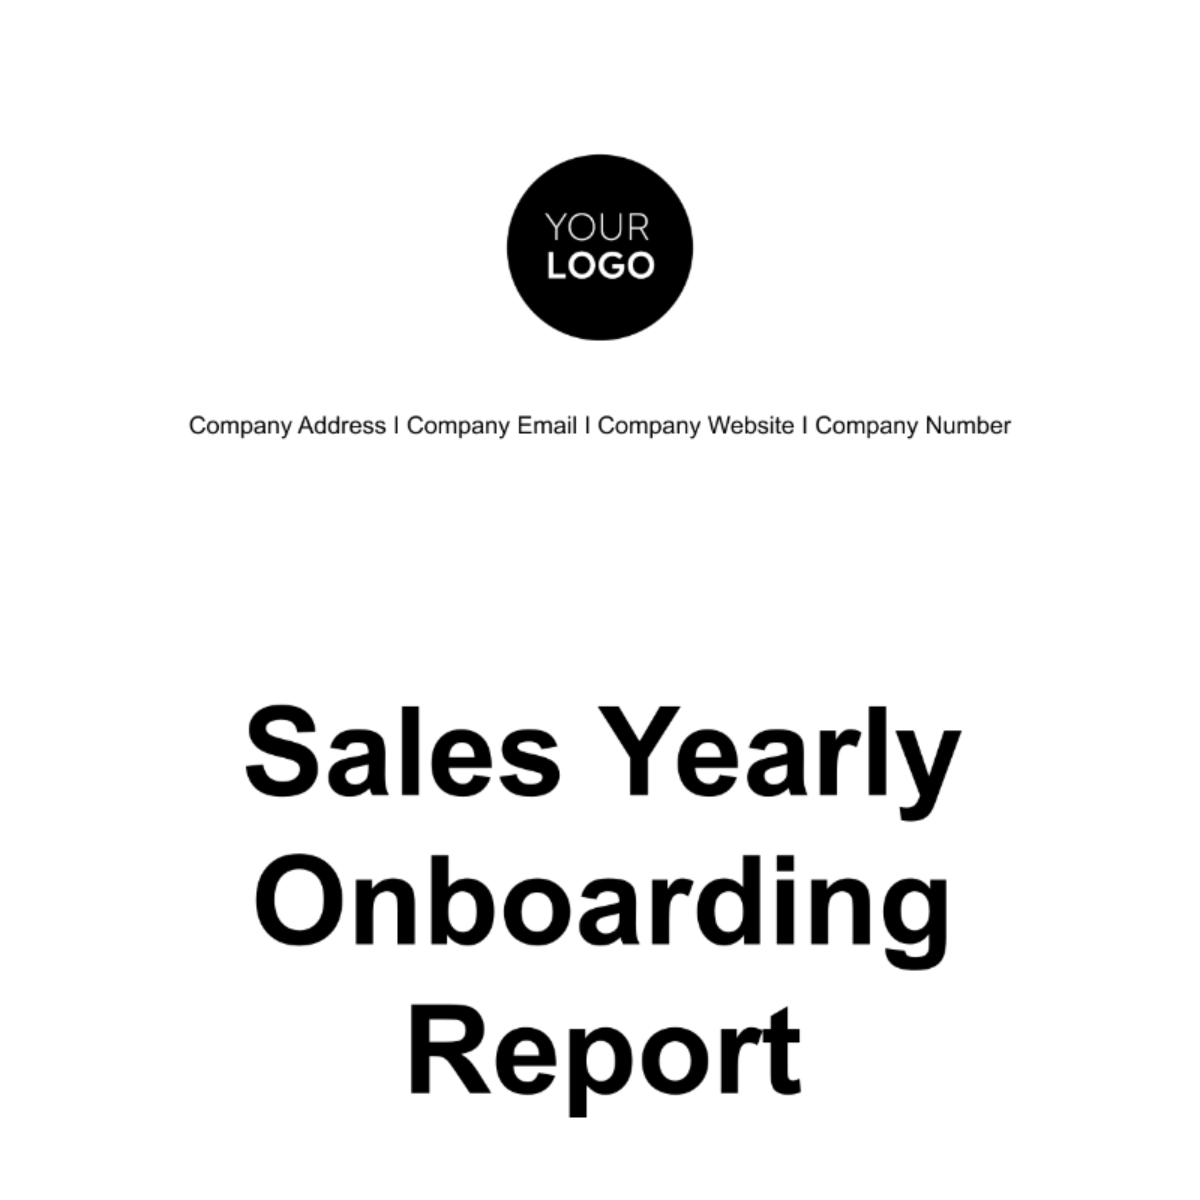 Free Sales Yearly Onboarding Report Template